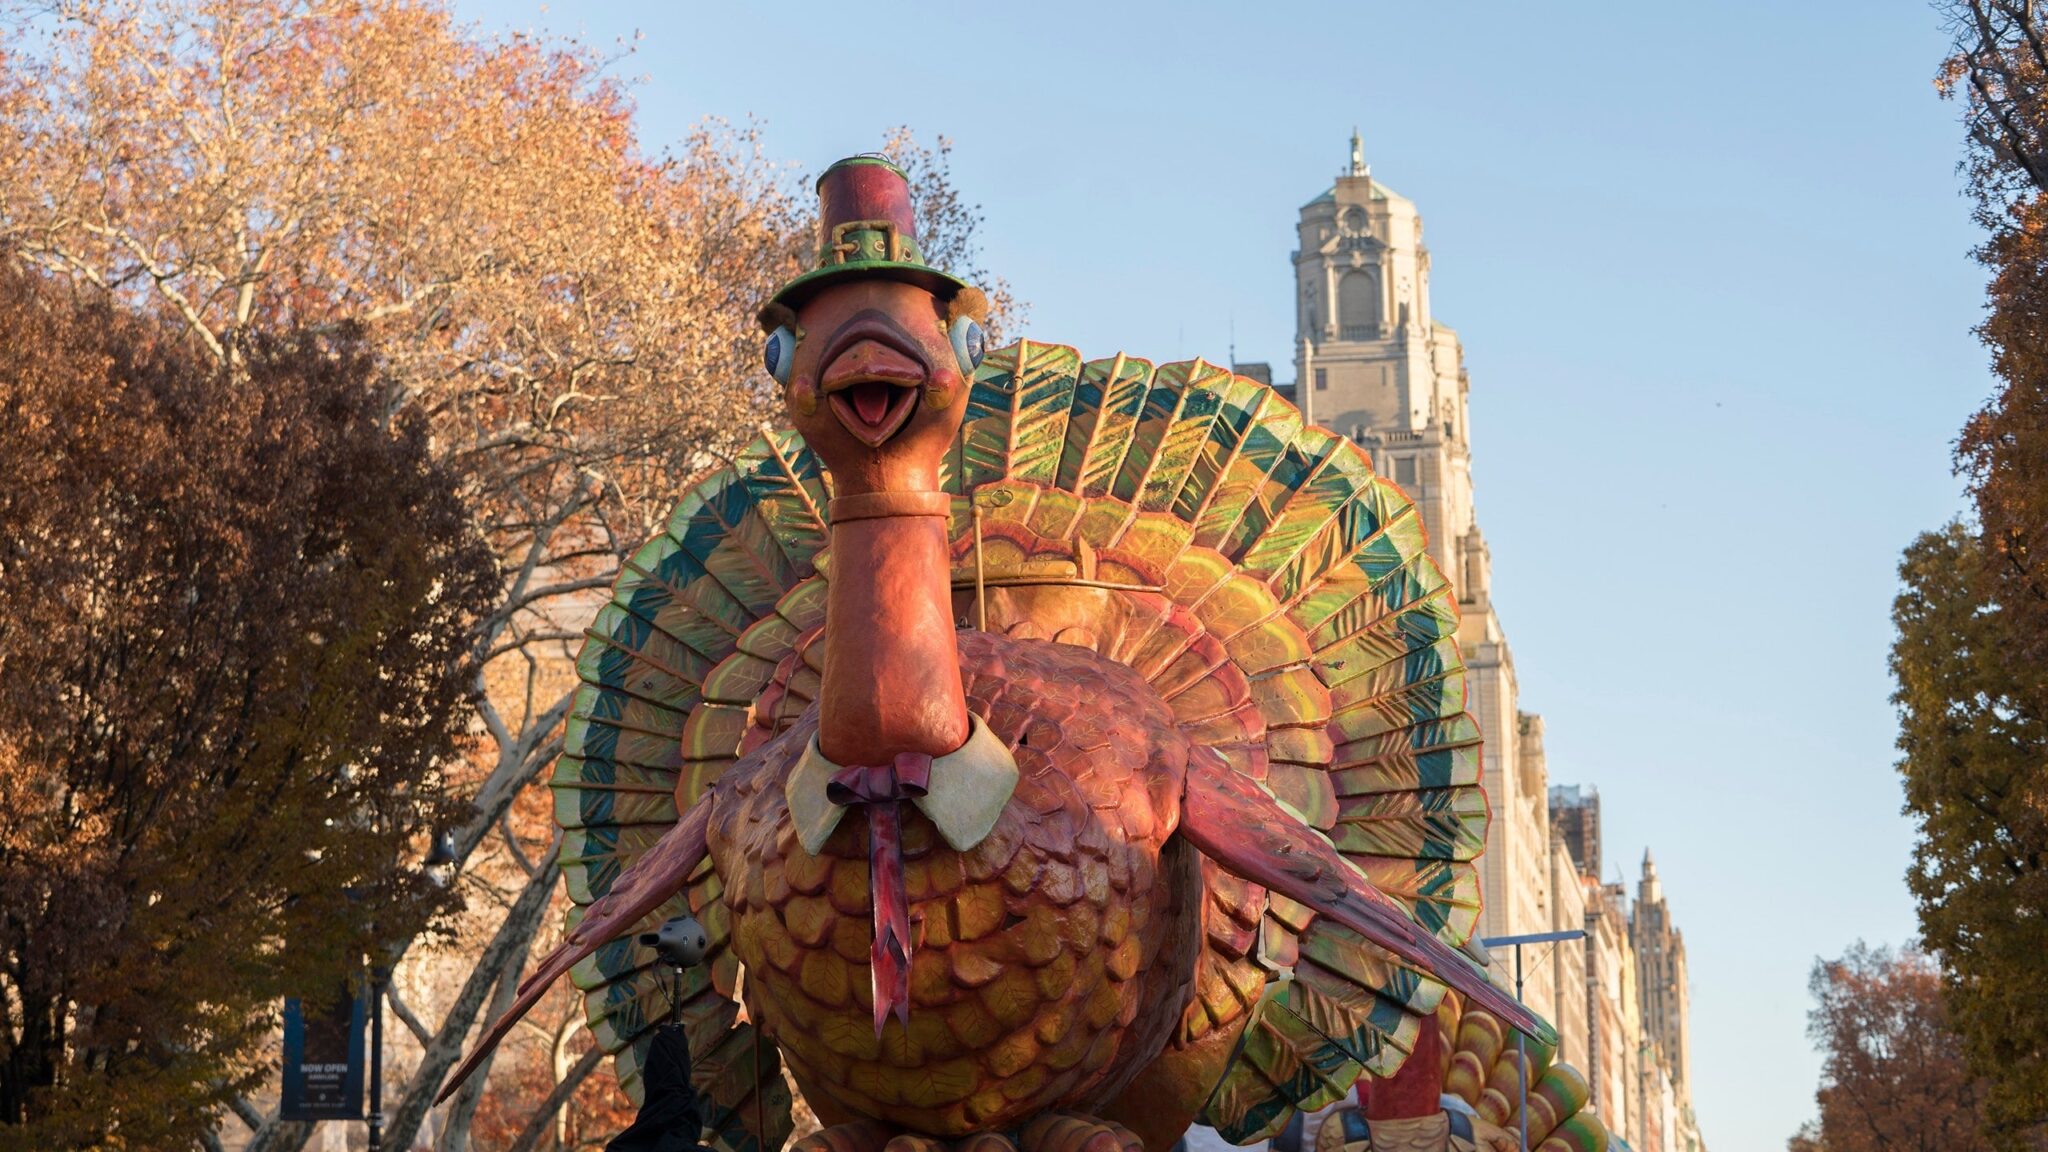 Macy’s Thanksgiving Day Parade Through the Years